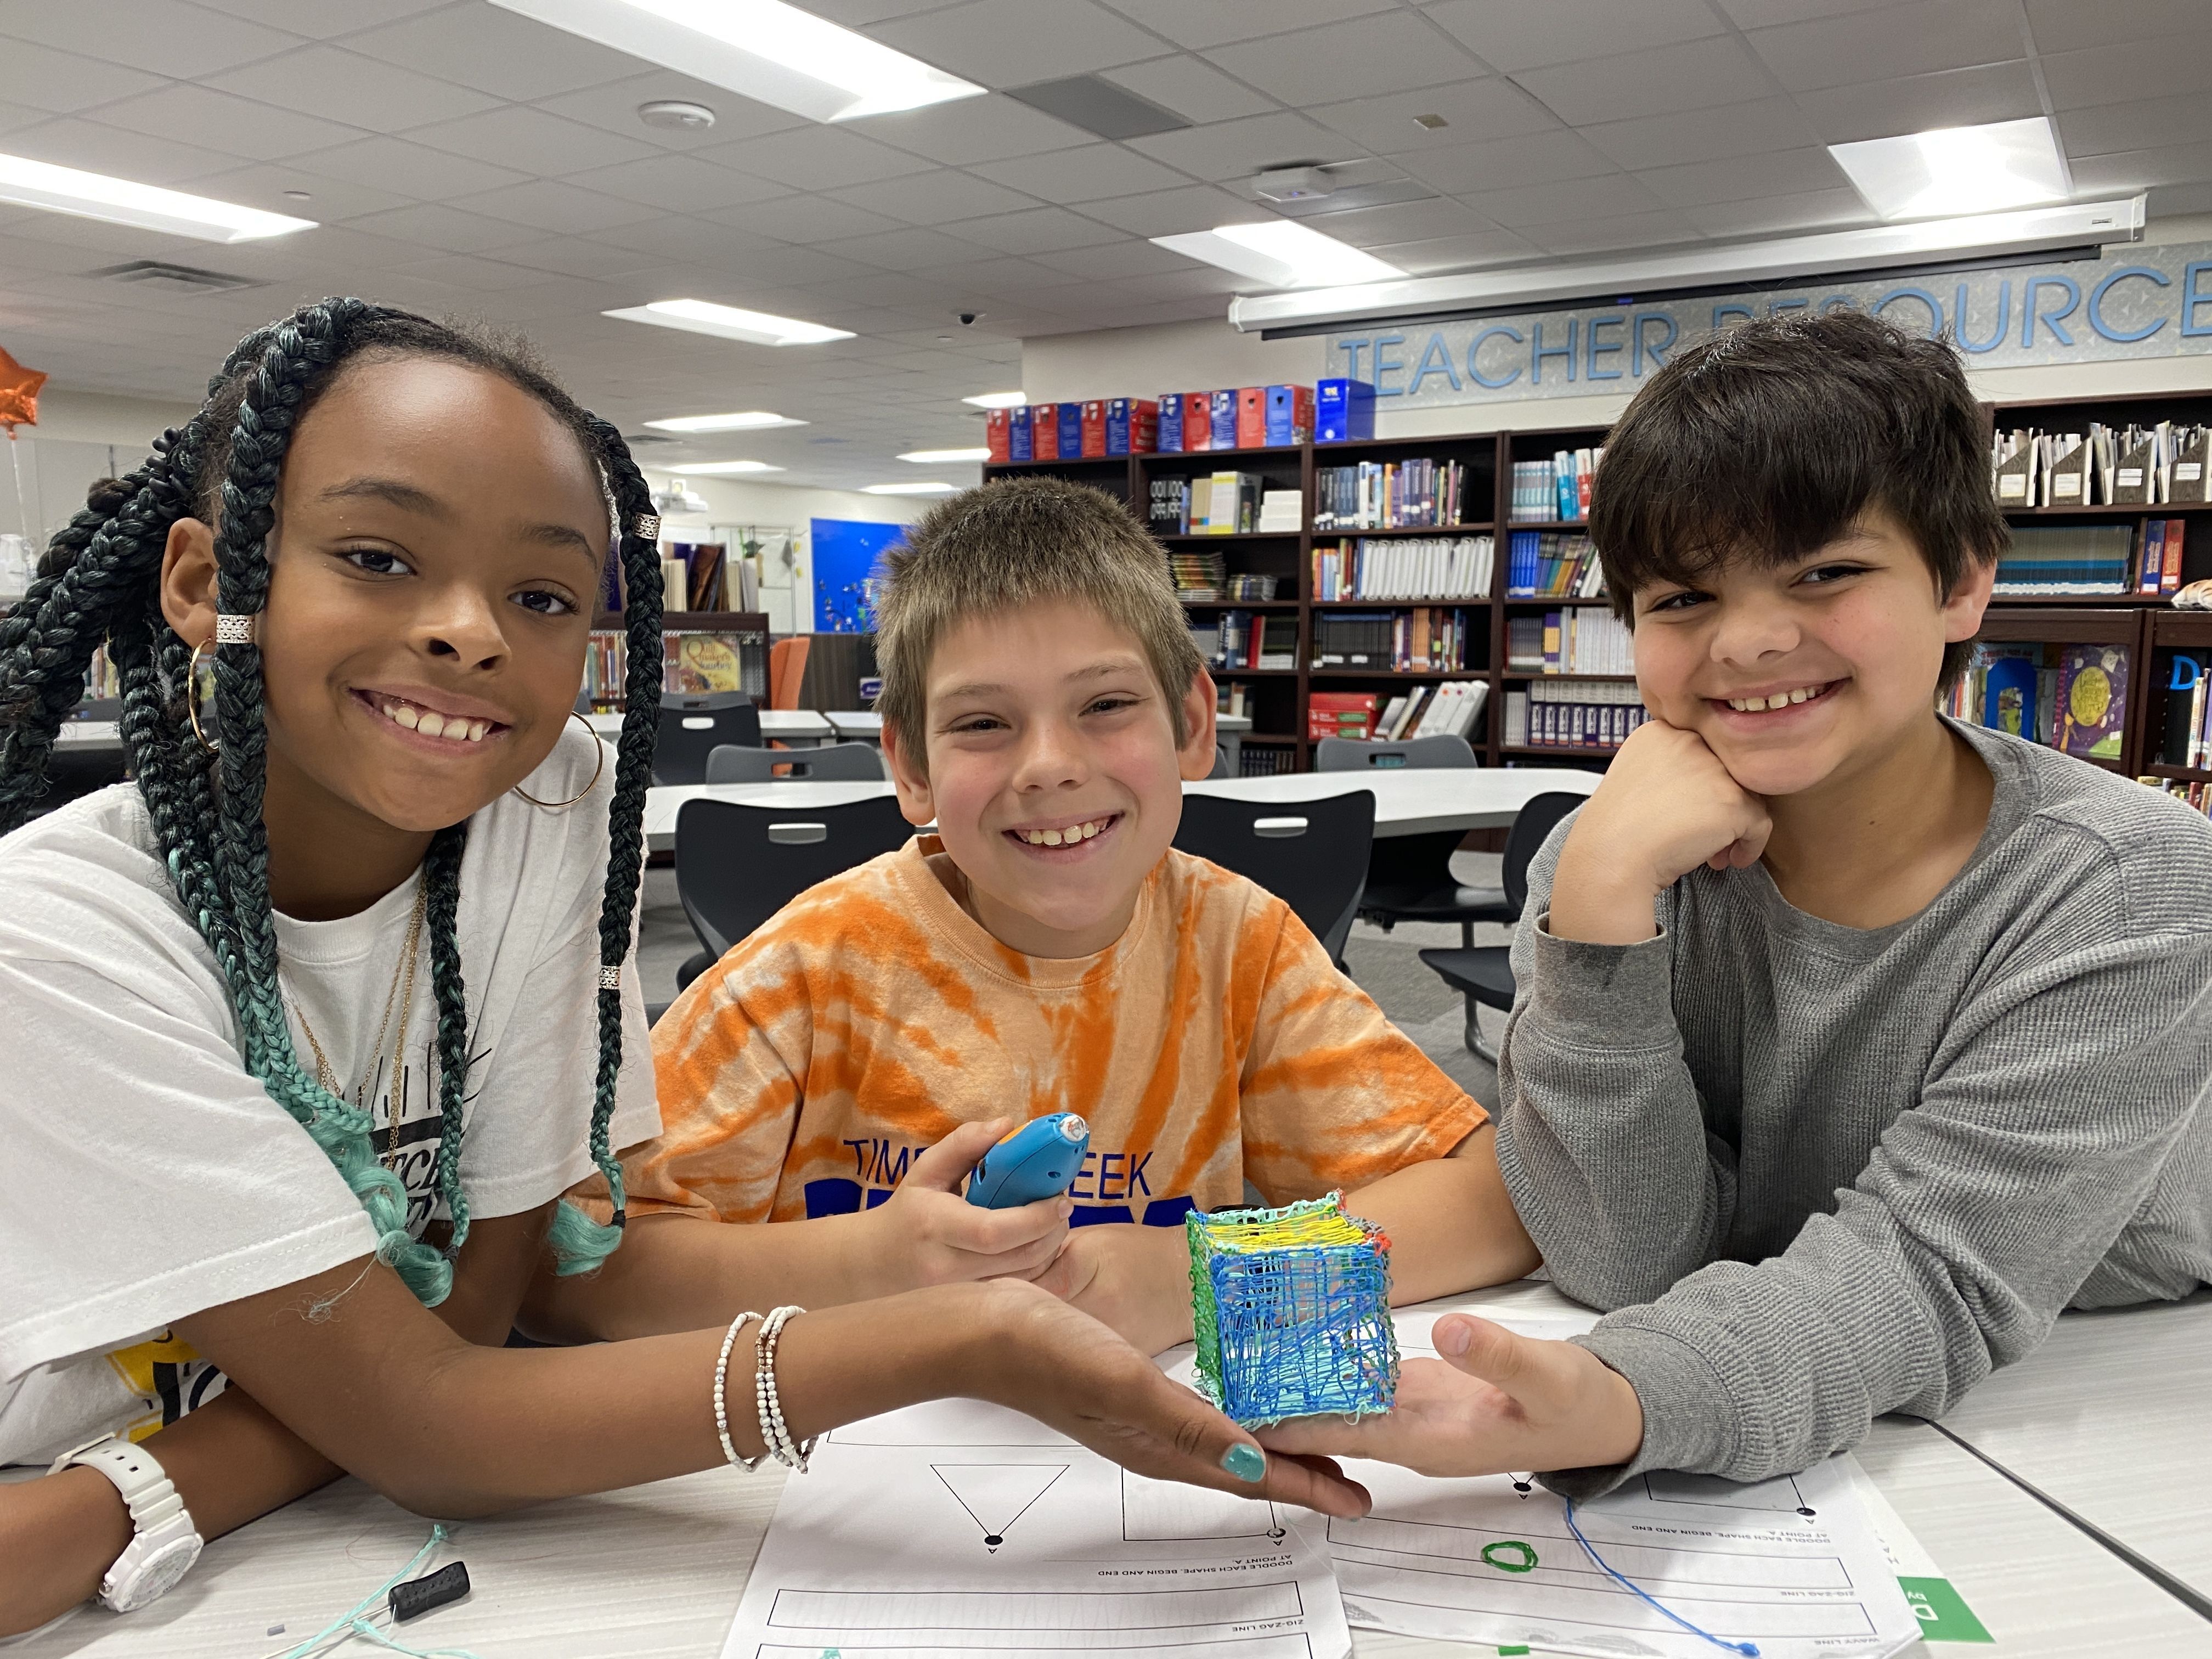 Timber Creek's "Library Lab" Celebrates A Successful First School Year